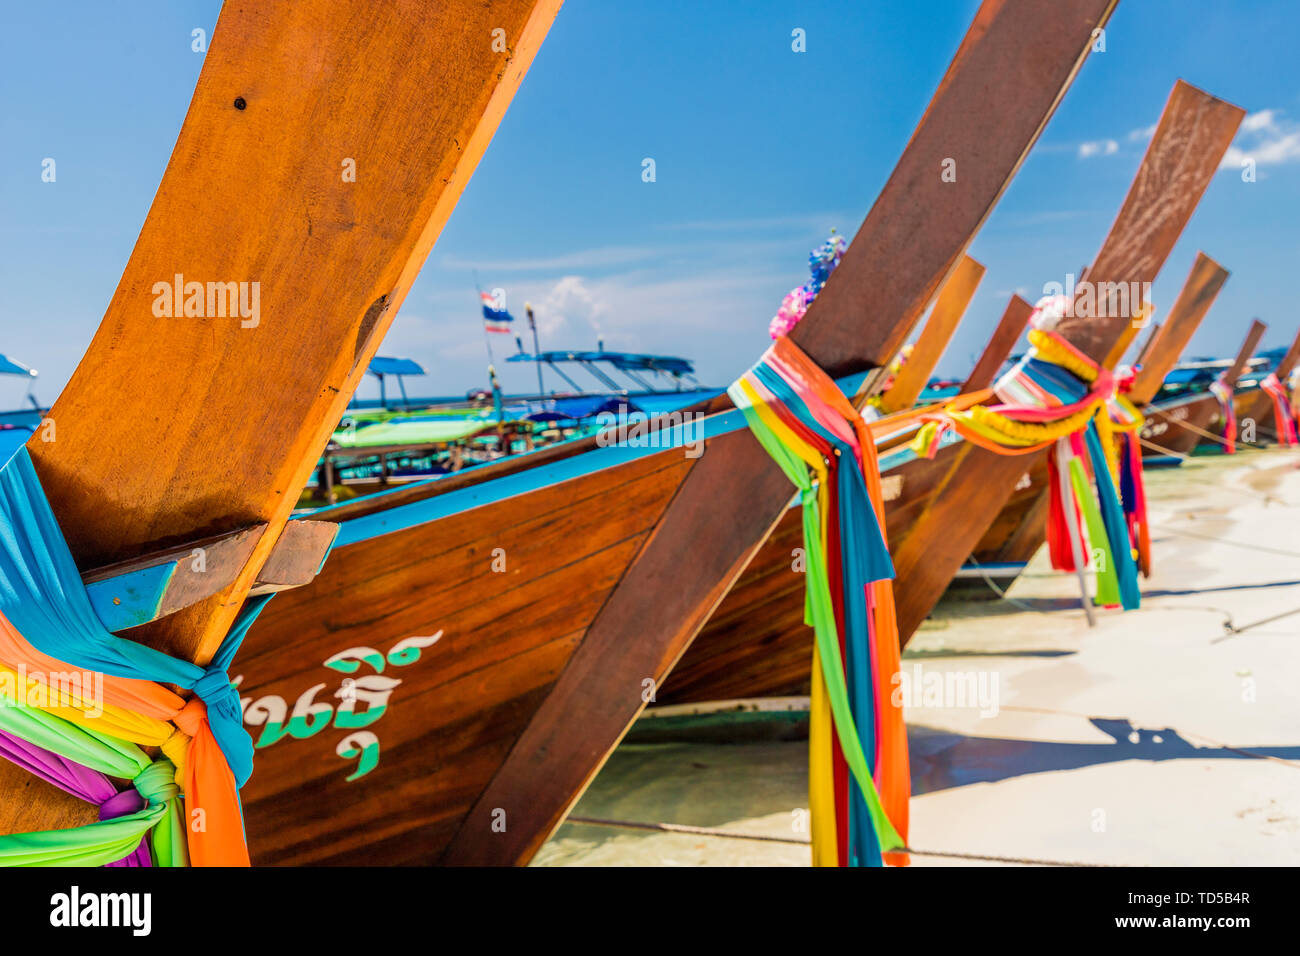 Long tail boats on Ko Rawi island in Tarutao Marine National Park, in Thailand, Southeast Asia, Asia Stock Photo